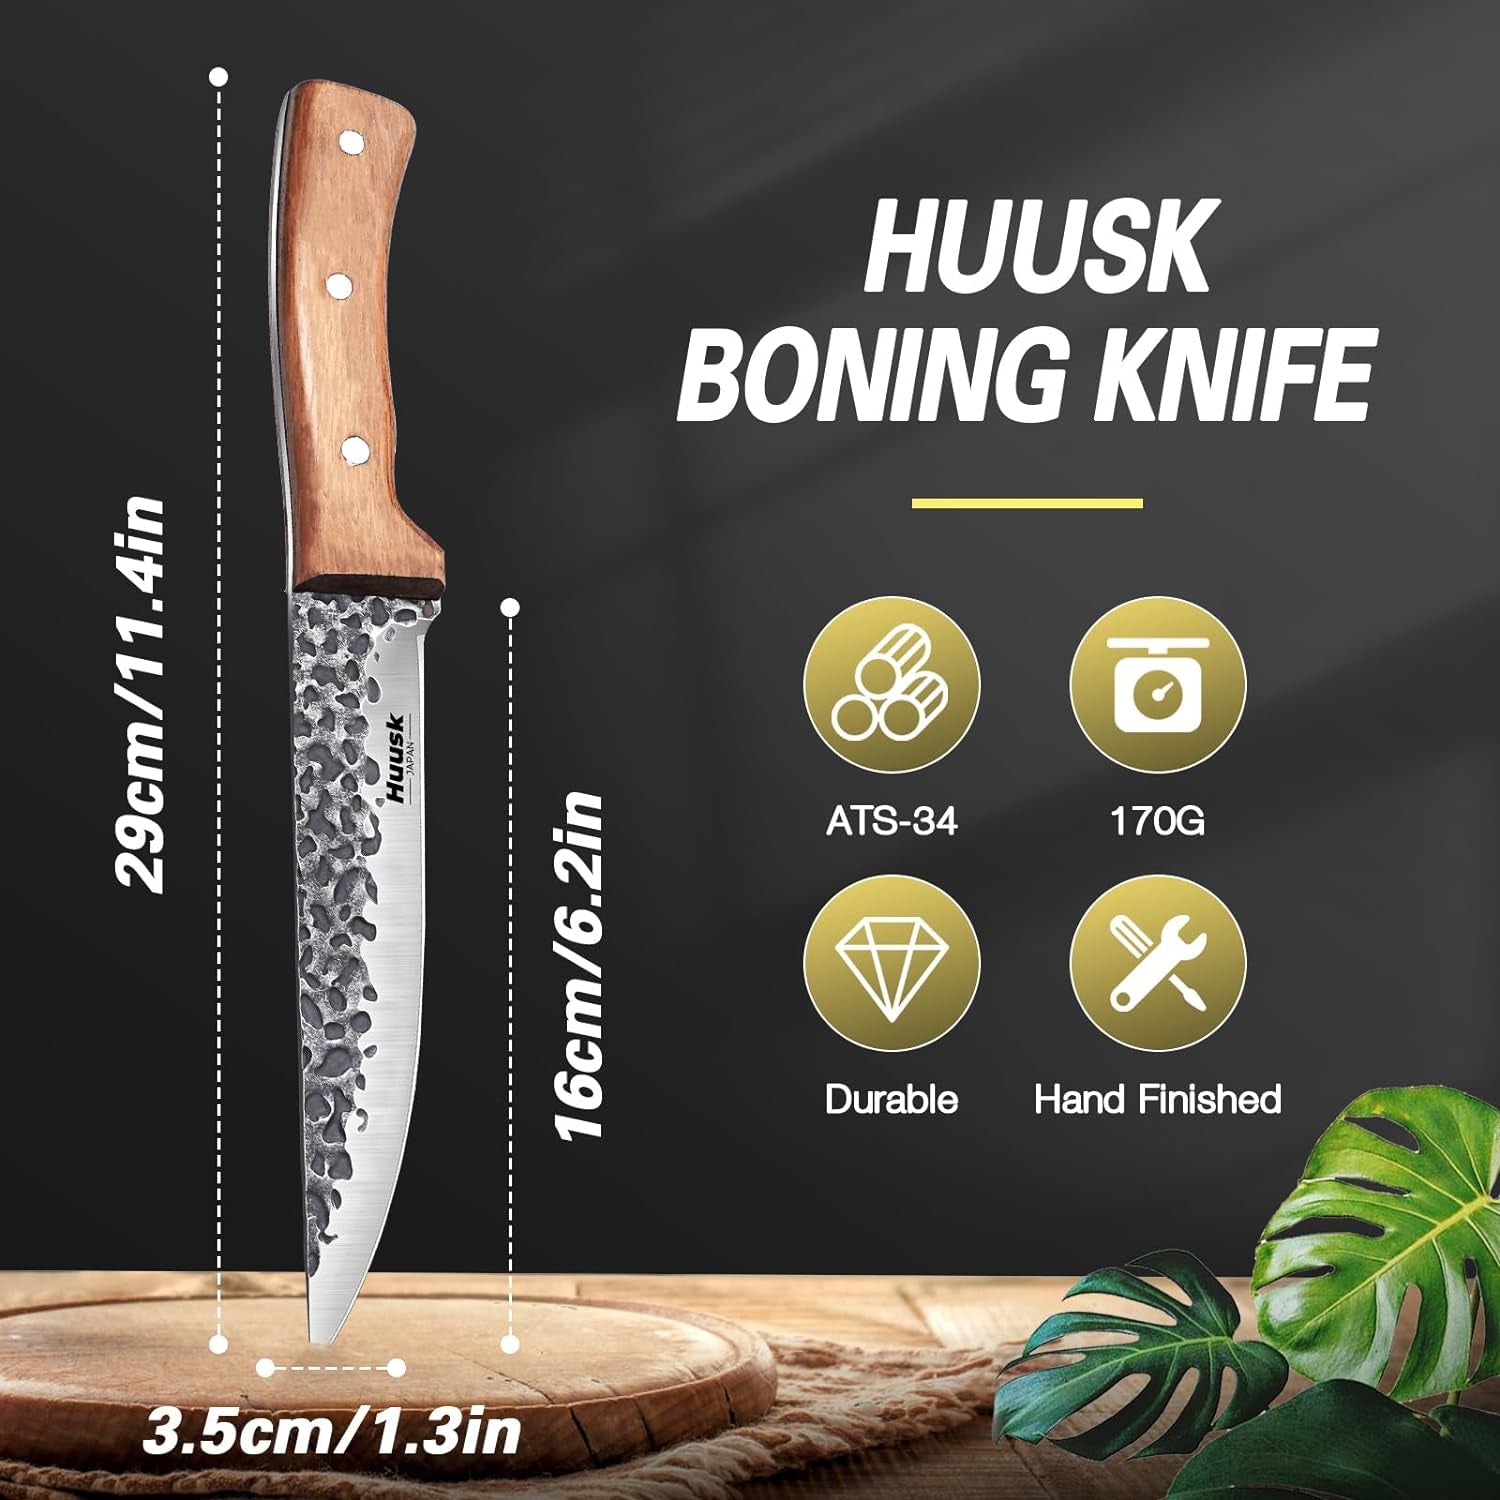 Huusk Knives from Japan, Boning Knife for Meat Cutting 6 Inch, Butcher Knife for Brisket Trimming, Viking Knife with Sheath for Outdoor Cooking, Full Tang Kitchen Utility Knife, Thanksgiving Gifts